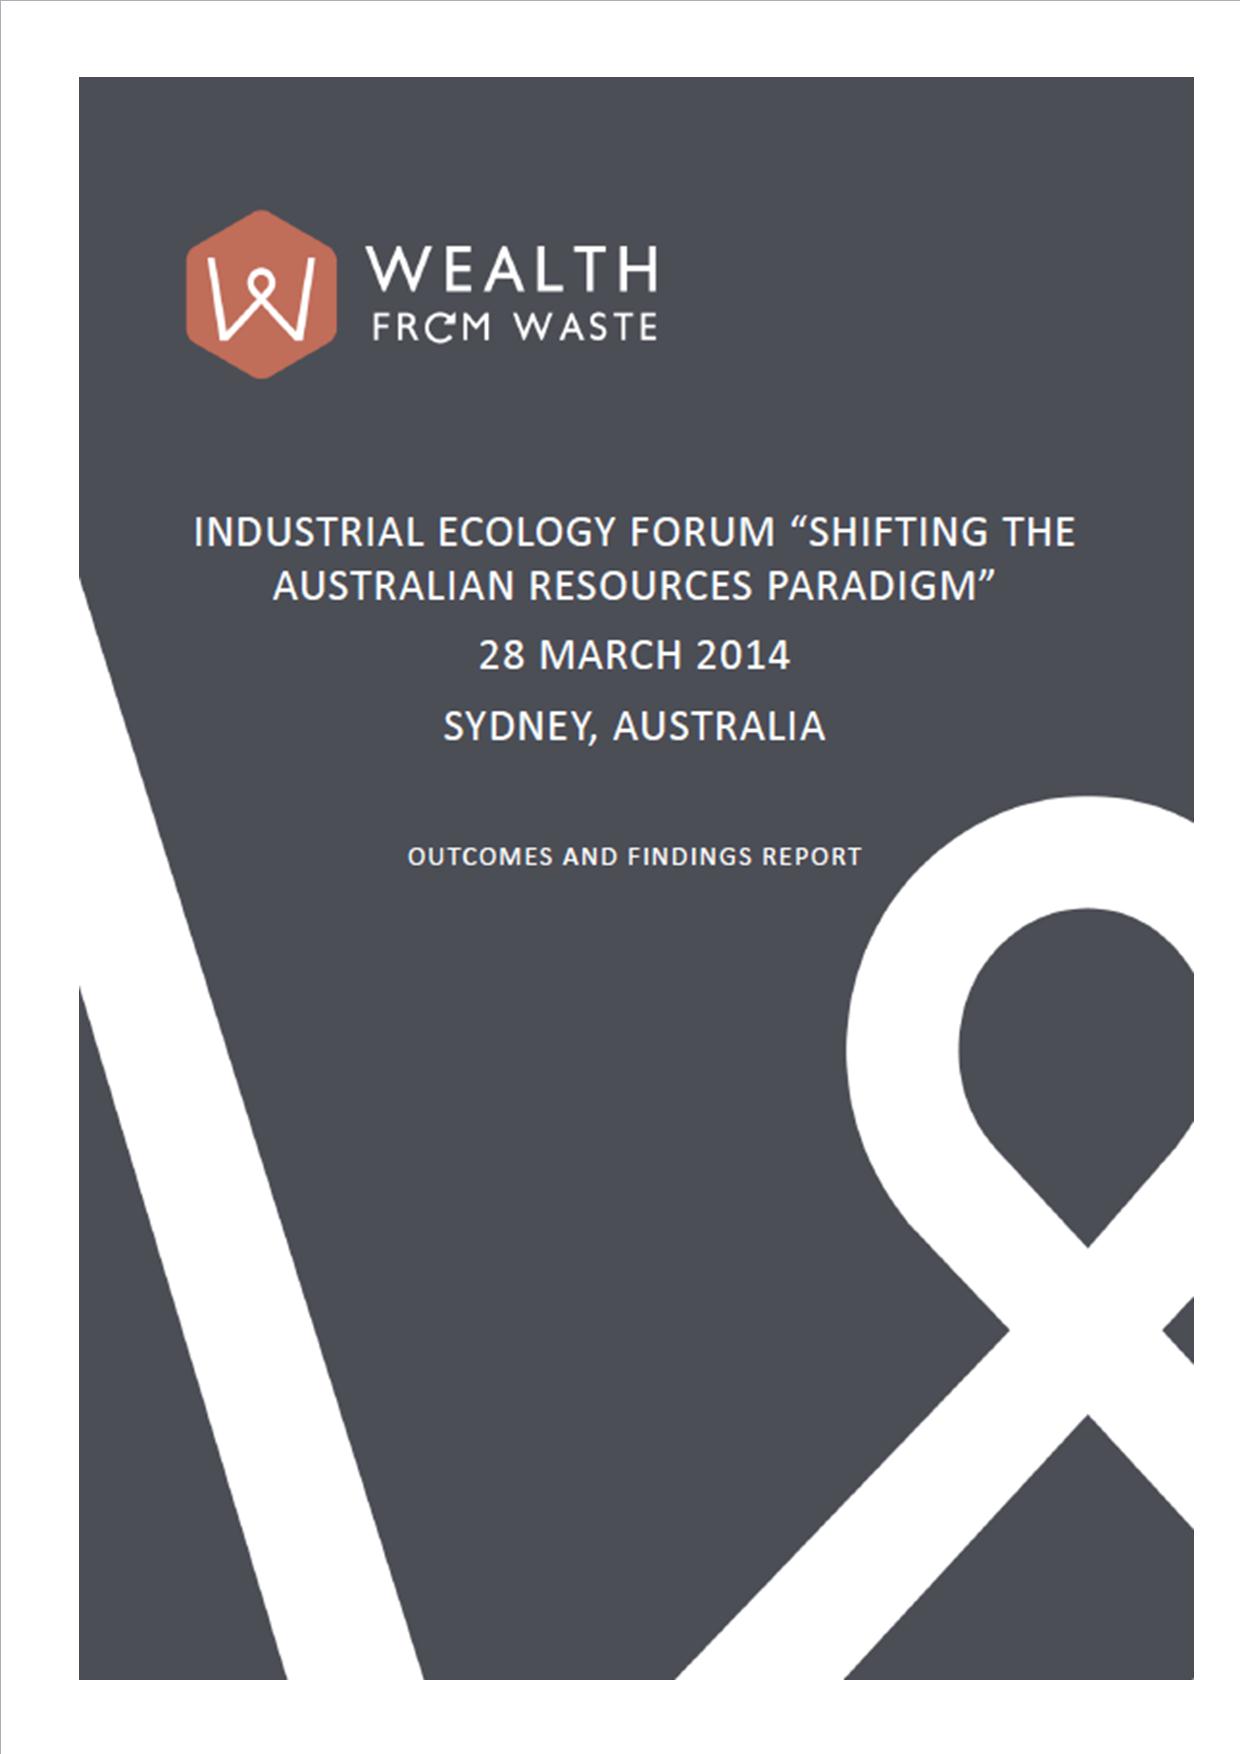 Industrial Ecology Forum "Shifting the Australian resources paradigm", 28 March 2014, Sydney: Outcomes and Findings Report